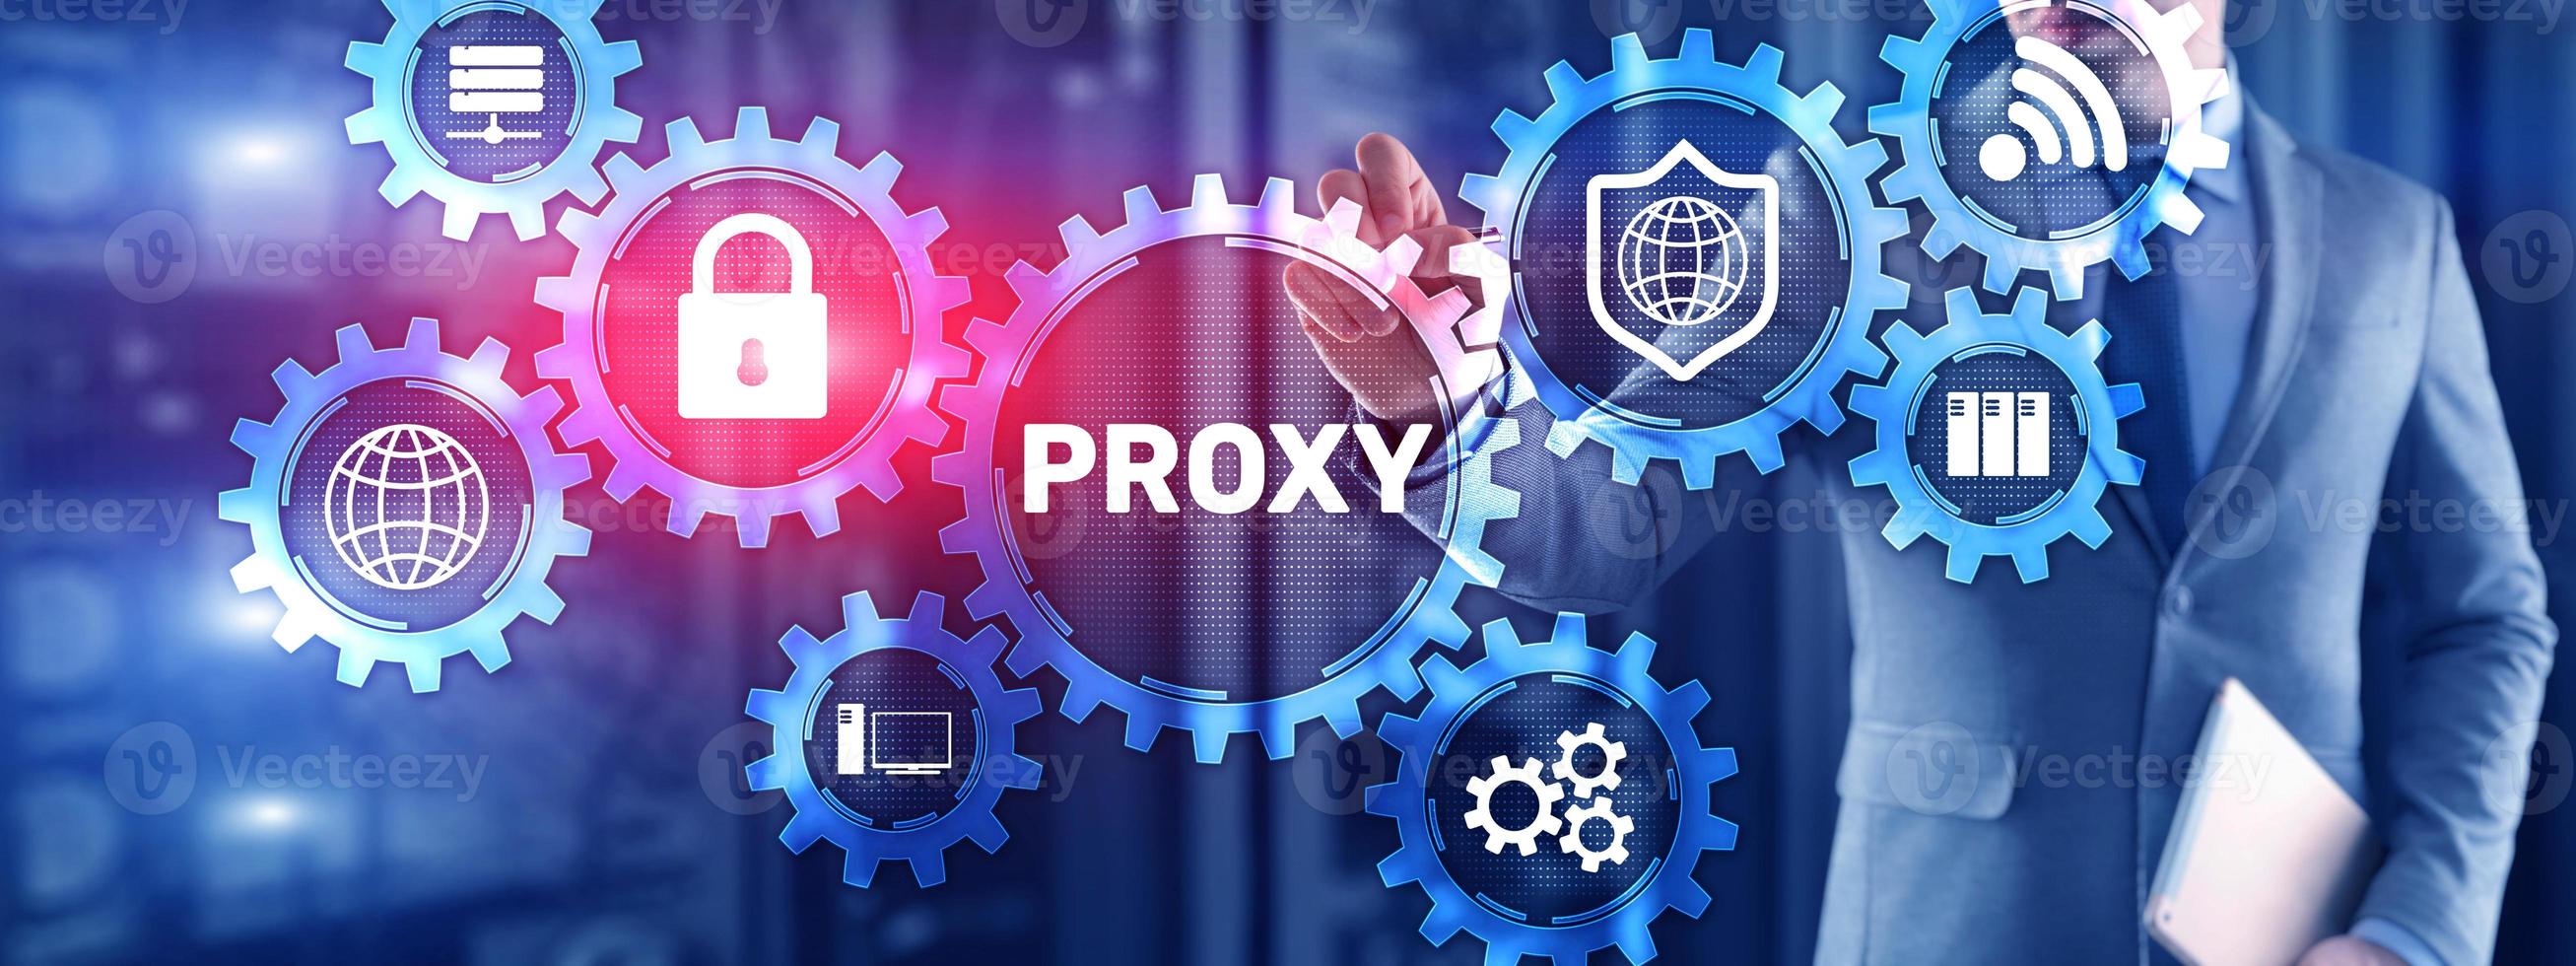 Proxy. Network administrator access the proxy server. Technology concept photo